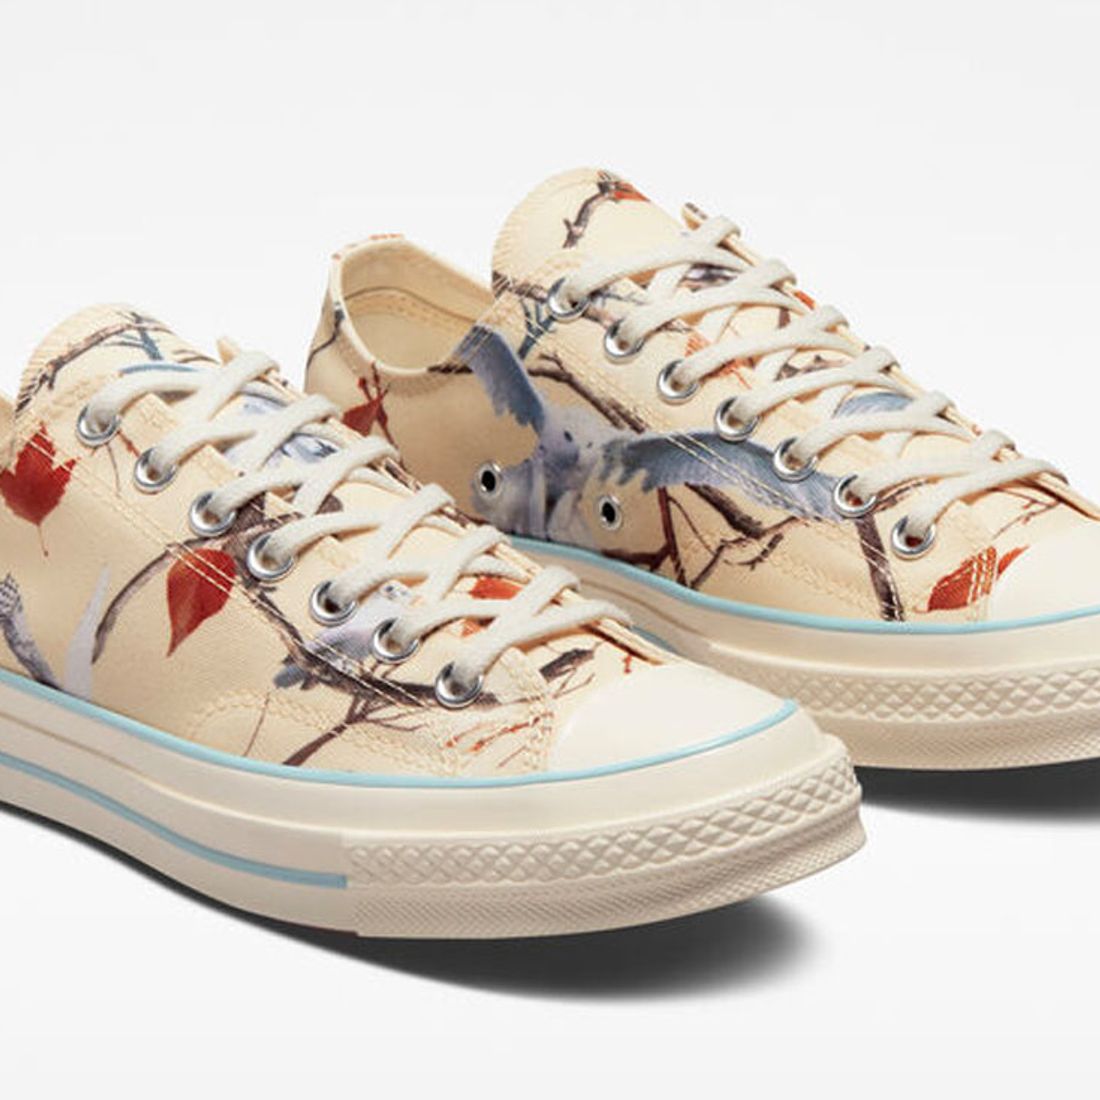 Tyler, The Creator and Converse just collaborated on a